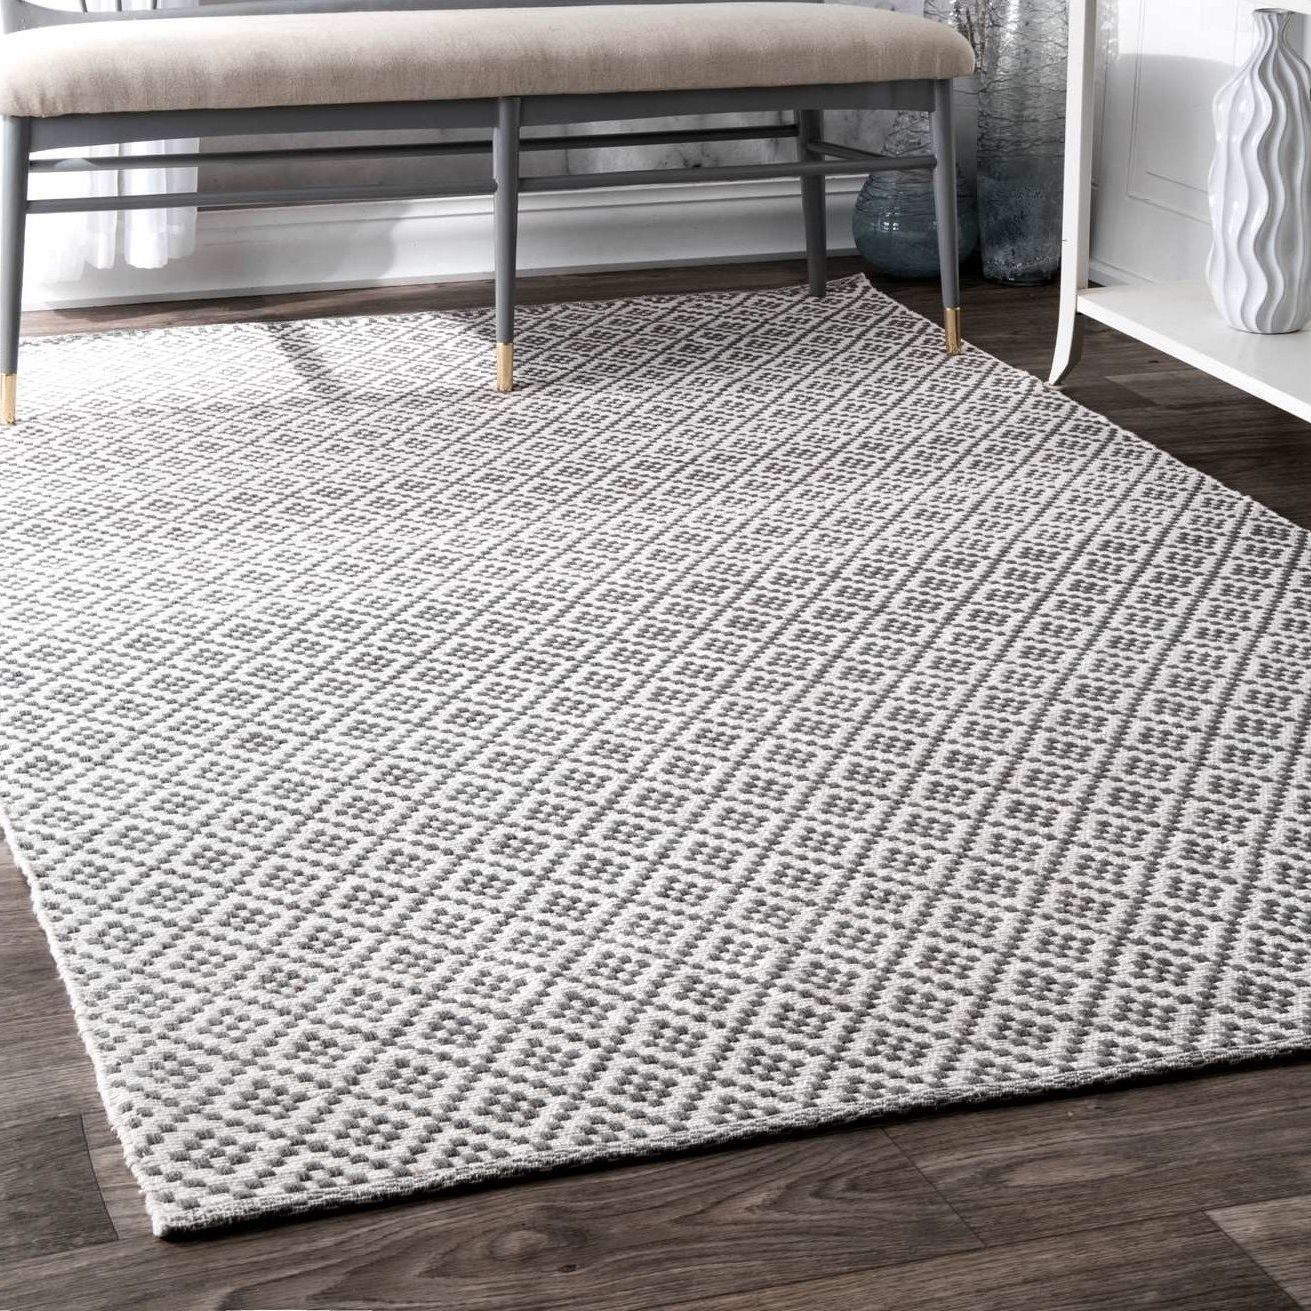 Trellis Rug, Area Rugs Intended For Gray And Beige Trellis Cylinder Pouf Ottomans (View 8 of 10)